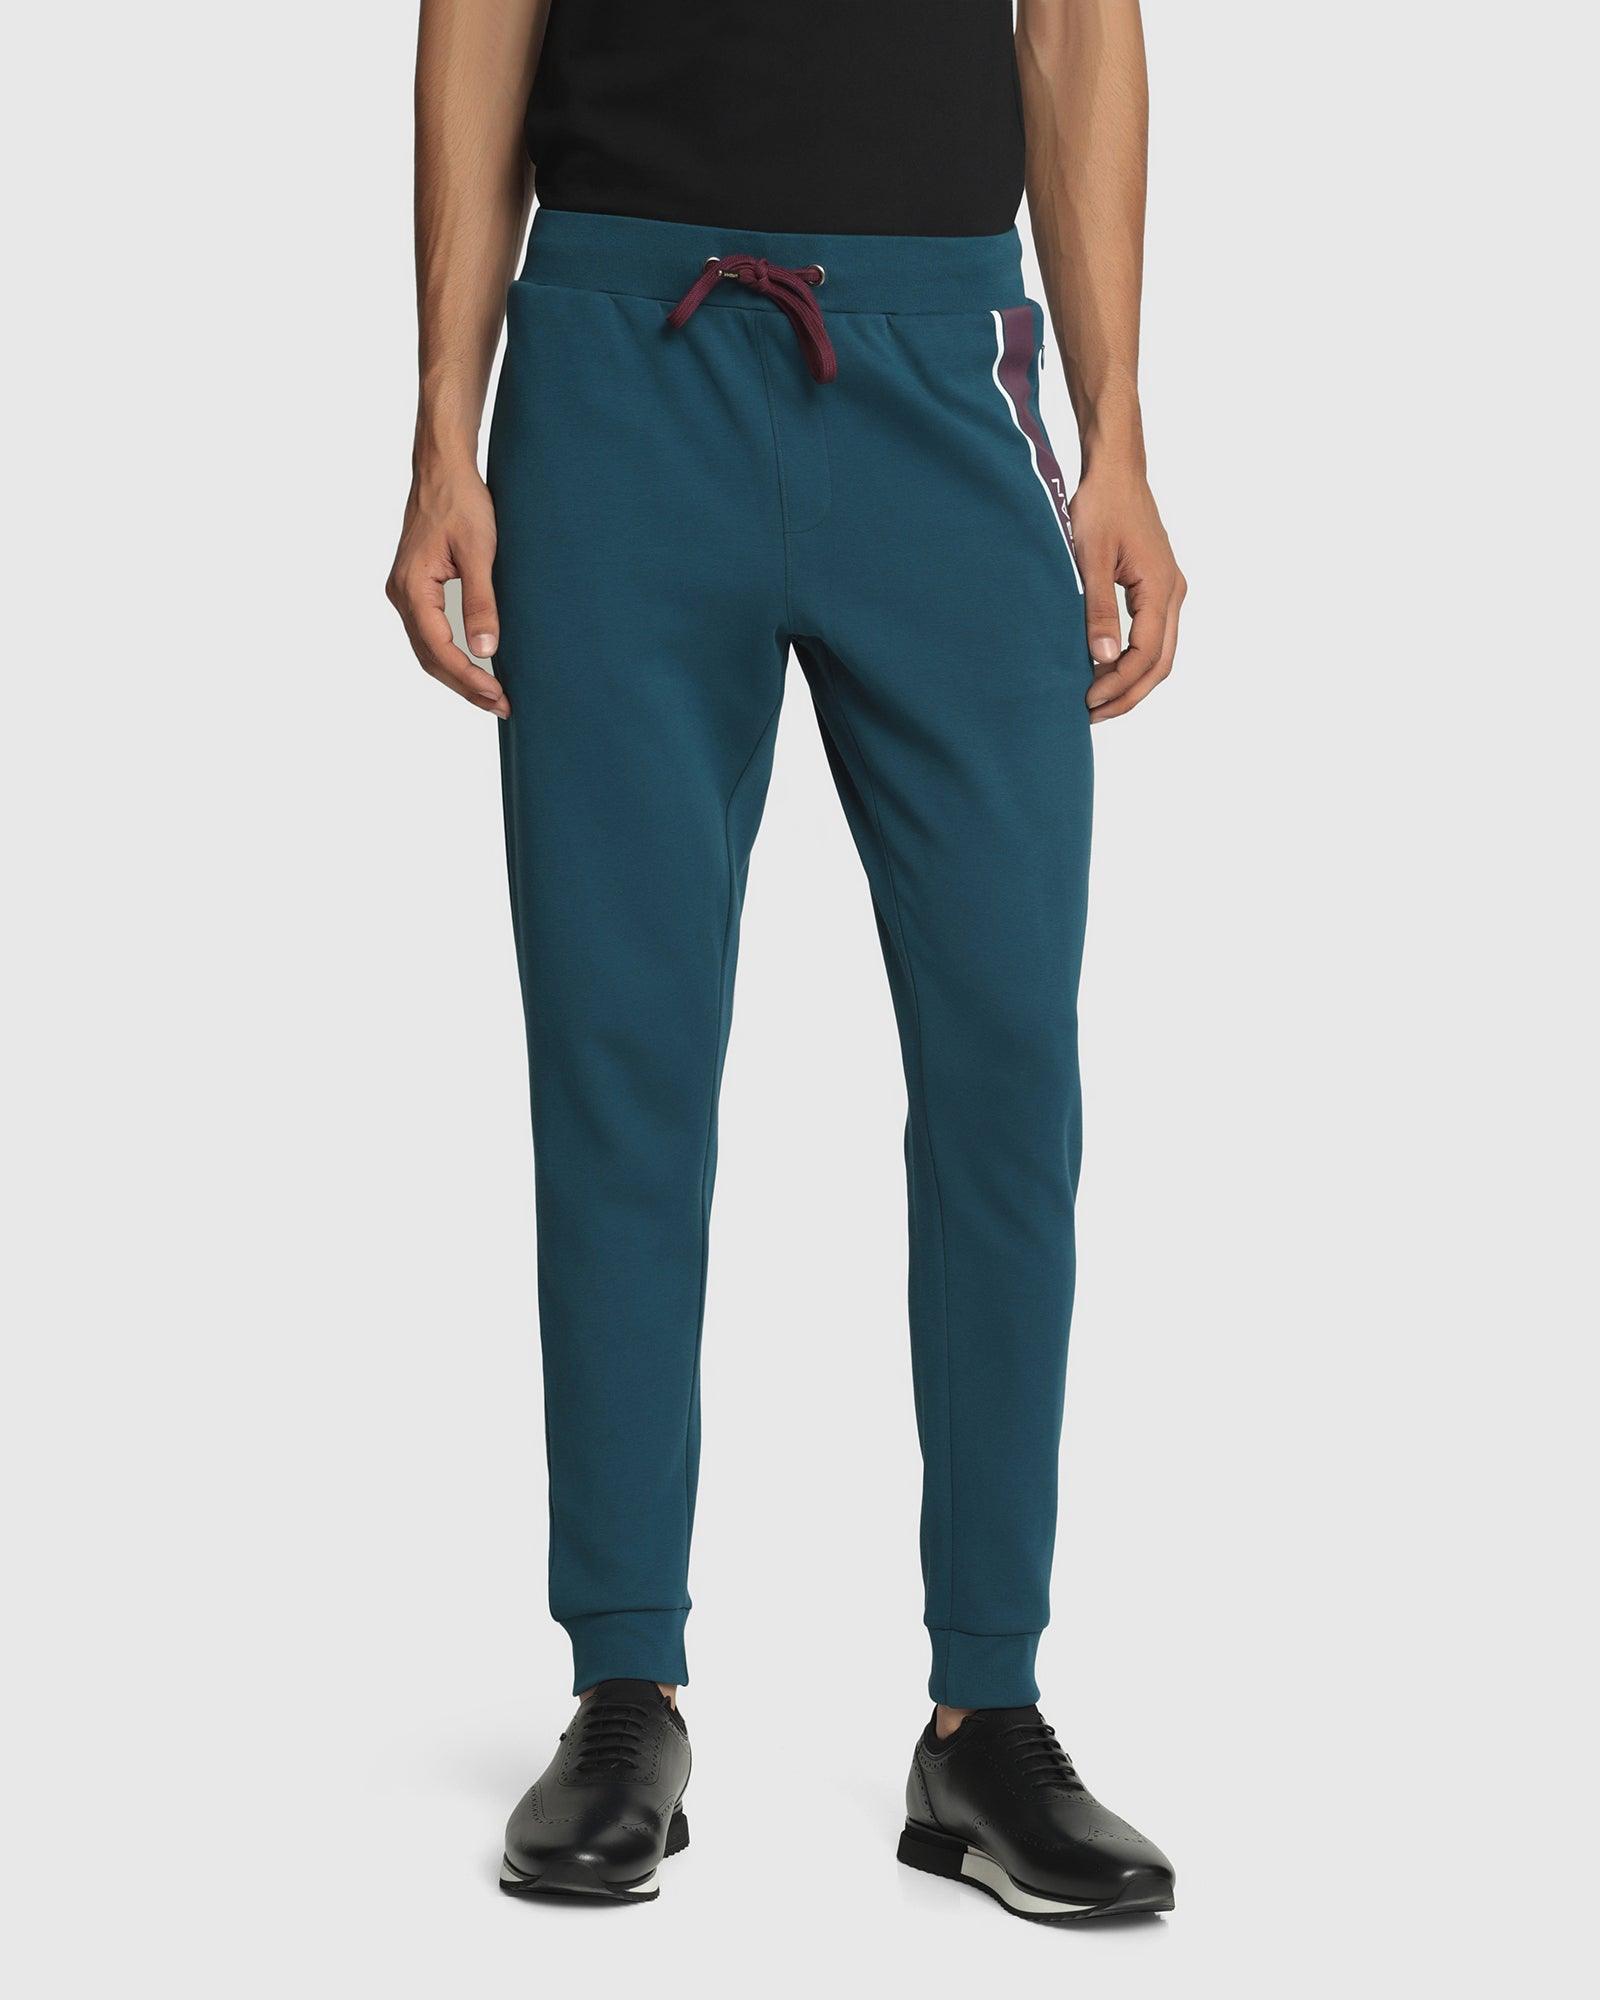 casual-teal-blue-printed-jogger---accent